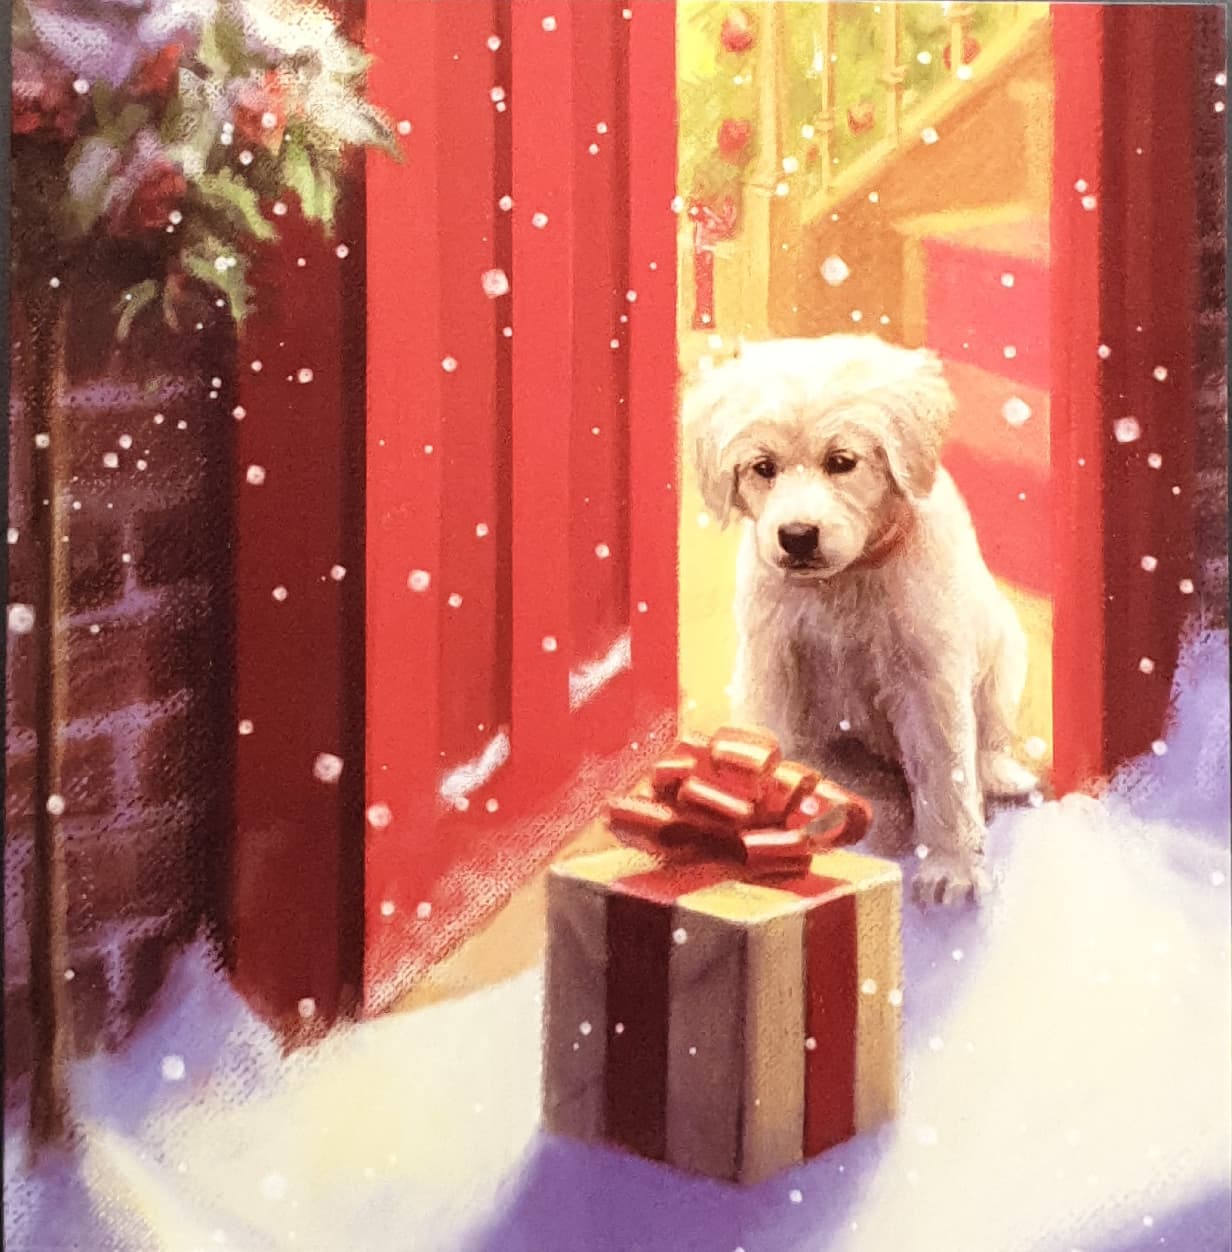 Charity Christmas Card (In Irish & English) - Pack of 8 Large Size / Cystic Fibrosis Ireland - Puppy & GIft at Door